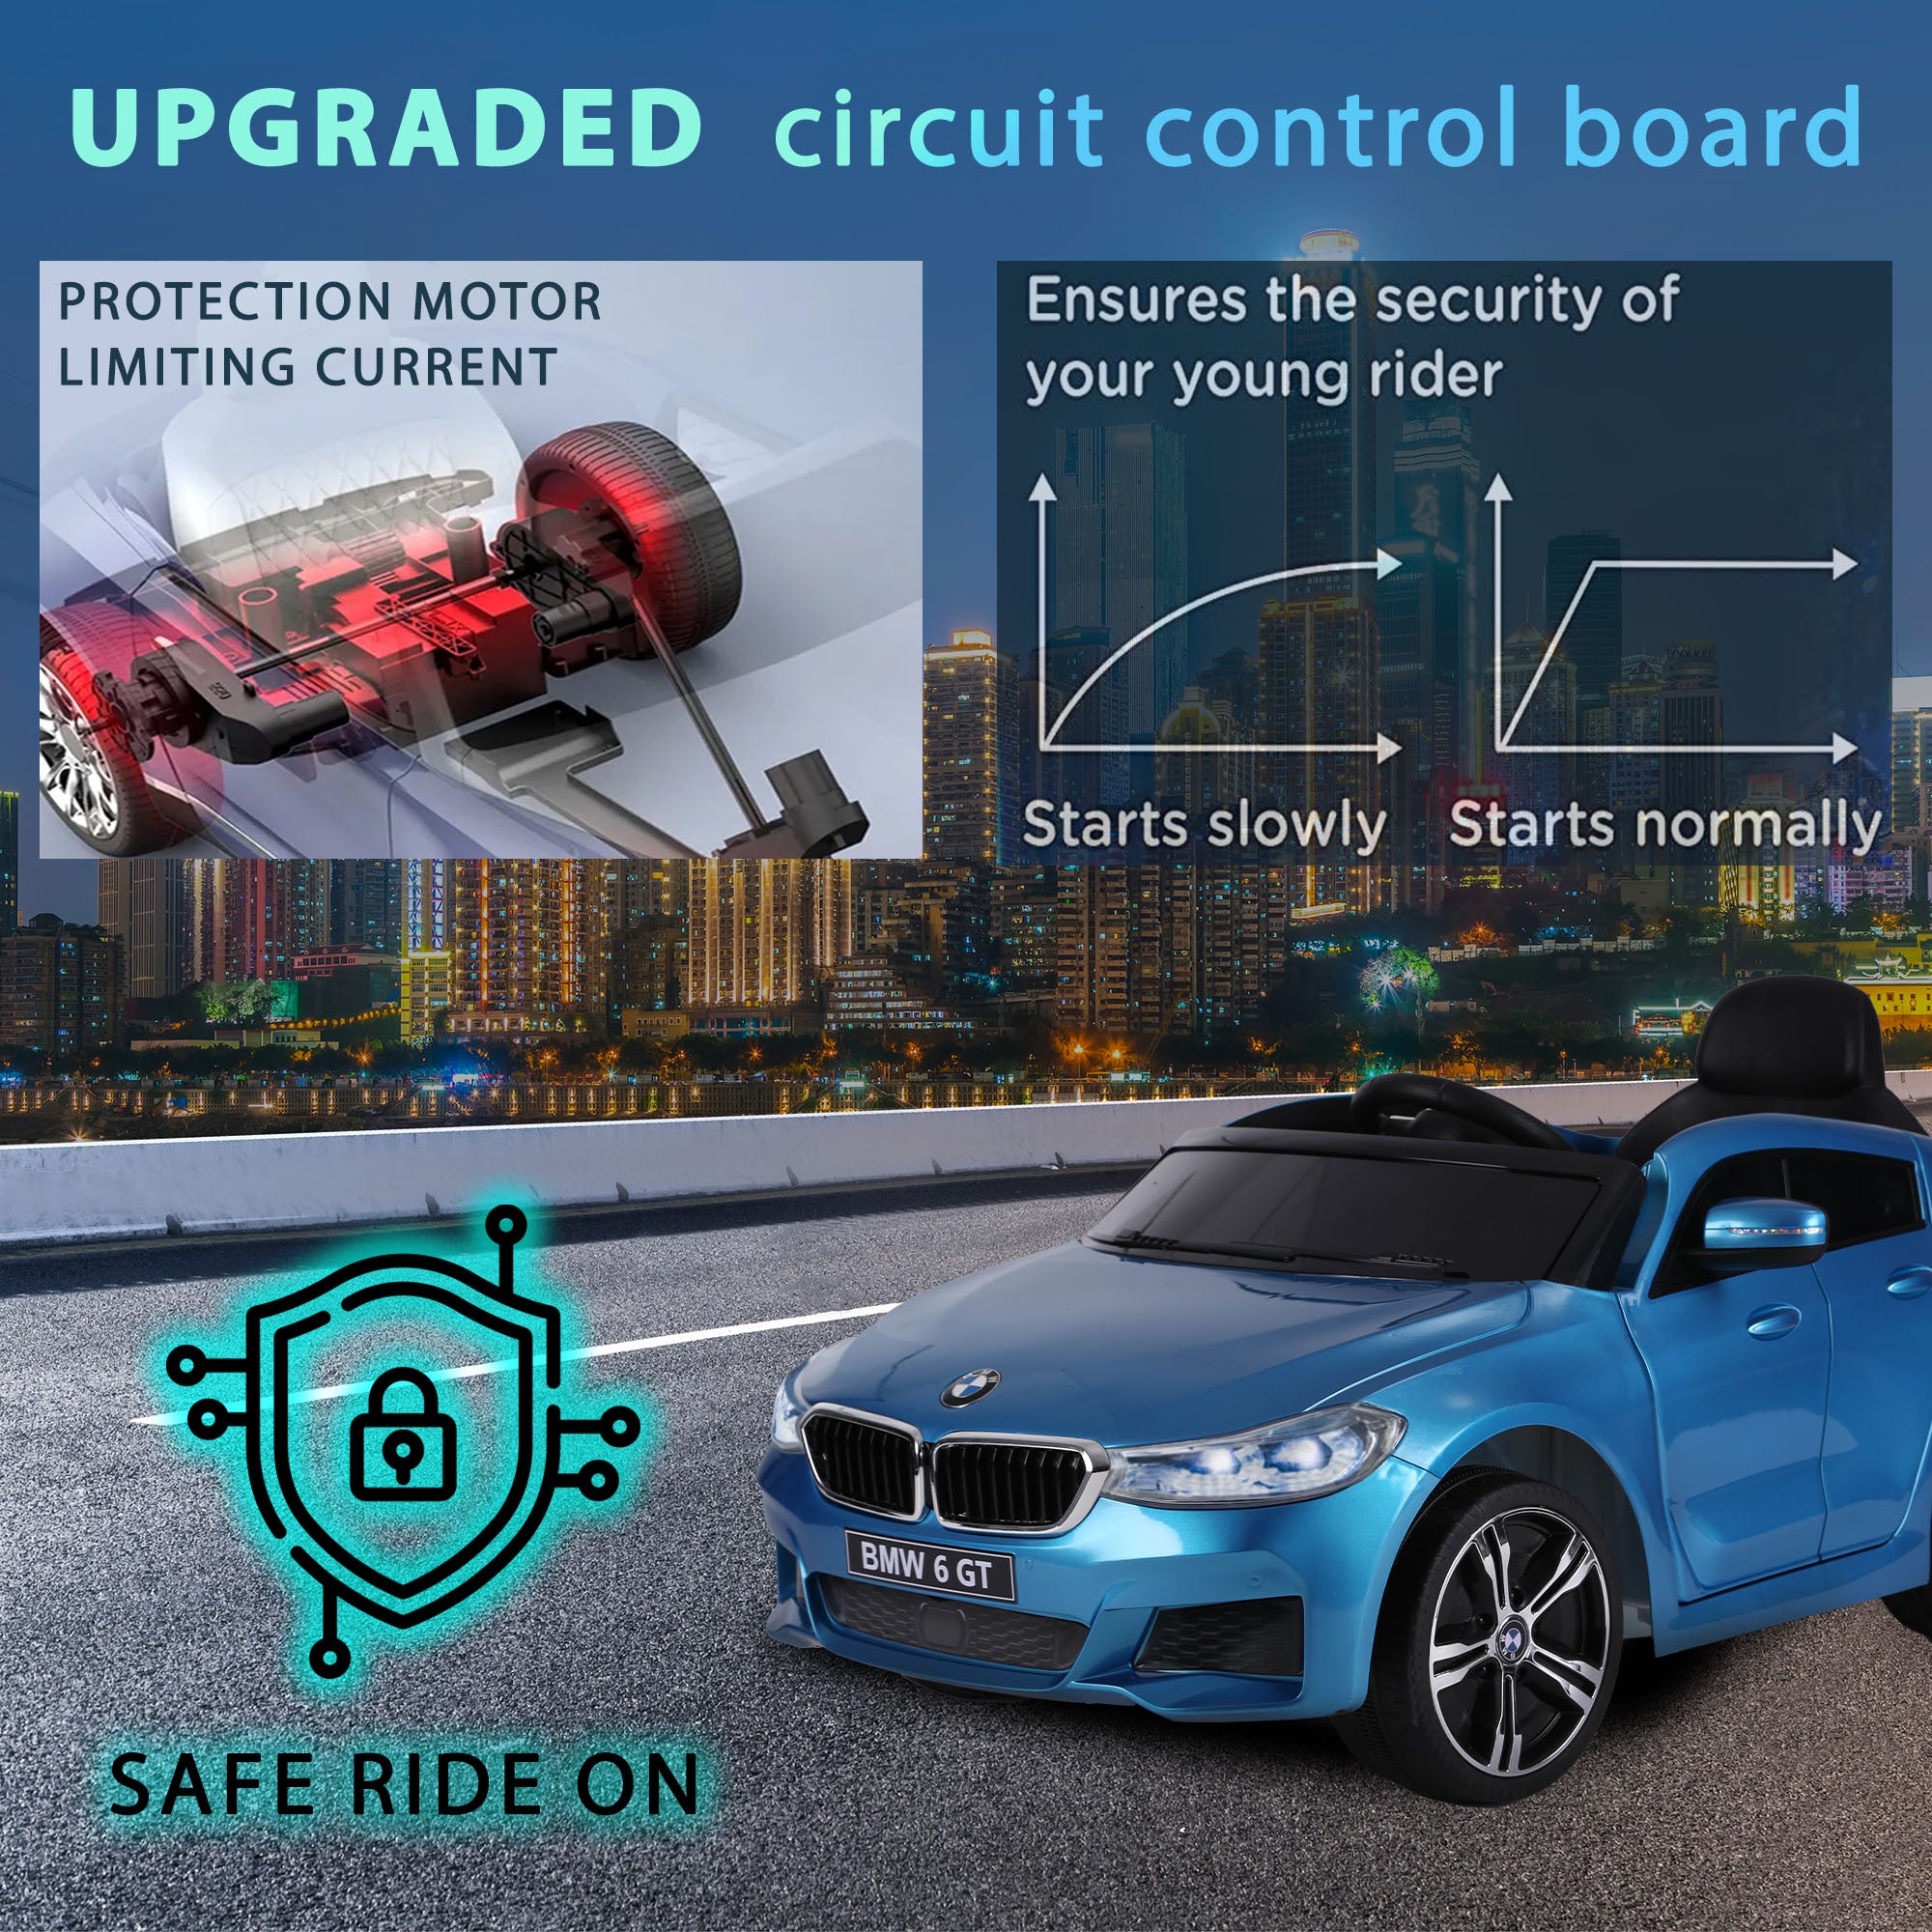 Kidsera BMW GT6 12V Kids Ride On Car, Licensed Electric Car for Kids, Battery Powered 4-Wheel Electric Vehicle with LED Light, Horn, Spring Suspension, 2 Speed, Ride On Toy for Kids Gril & Boys 